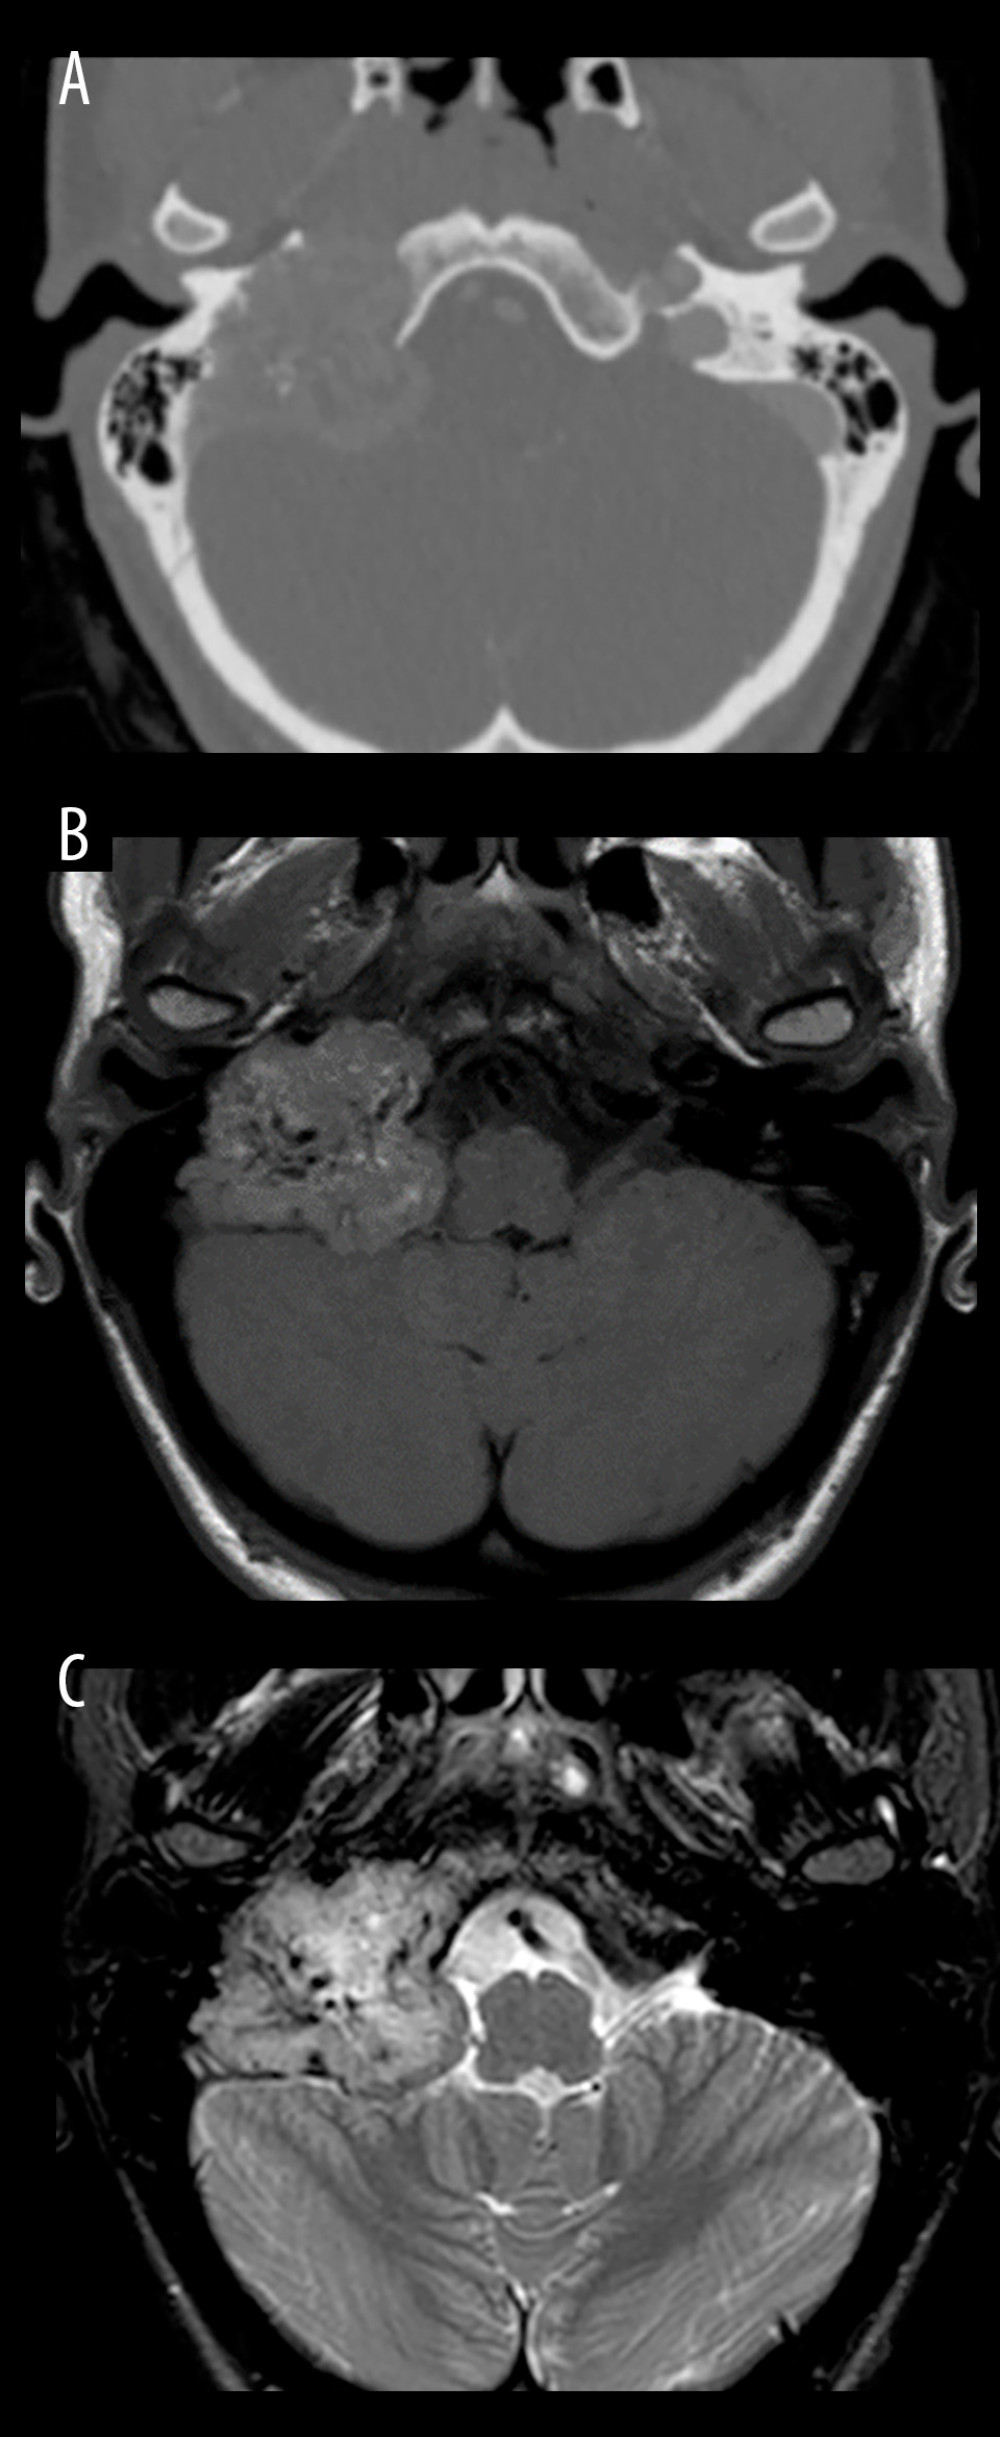 (A) Computed tomography image showing right soft-tissue mass lesion within the right temporal bone extending to the infra-temporal fossa and destruction of the temporal bone. (B) Magnetic resonant imaging (T1-weighted image) demonstrates a heterogenous soft-tissue mass lesion within the right temporal bone extending to the infra-temporal fossa and causing a mass effect on the right internal carotid artery and jugular vein and the right cerebellopontine angle. (C) Magnetic resonance imaging (T2-weighted image) demonstrates hyperintense mass with small low-signal flow voids (salt and pepper appearance).